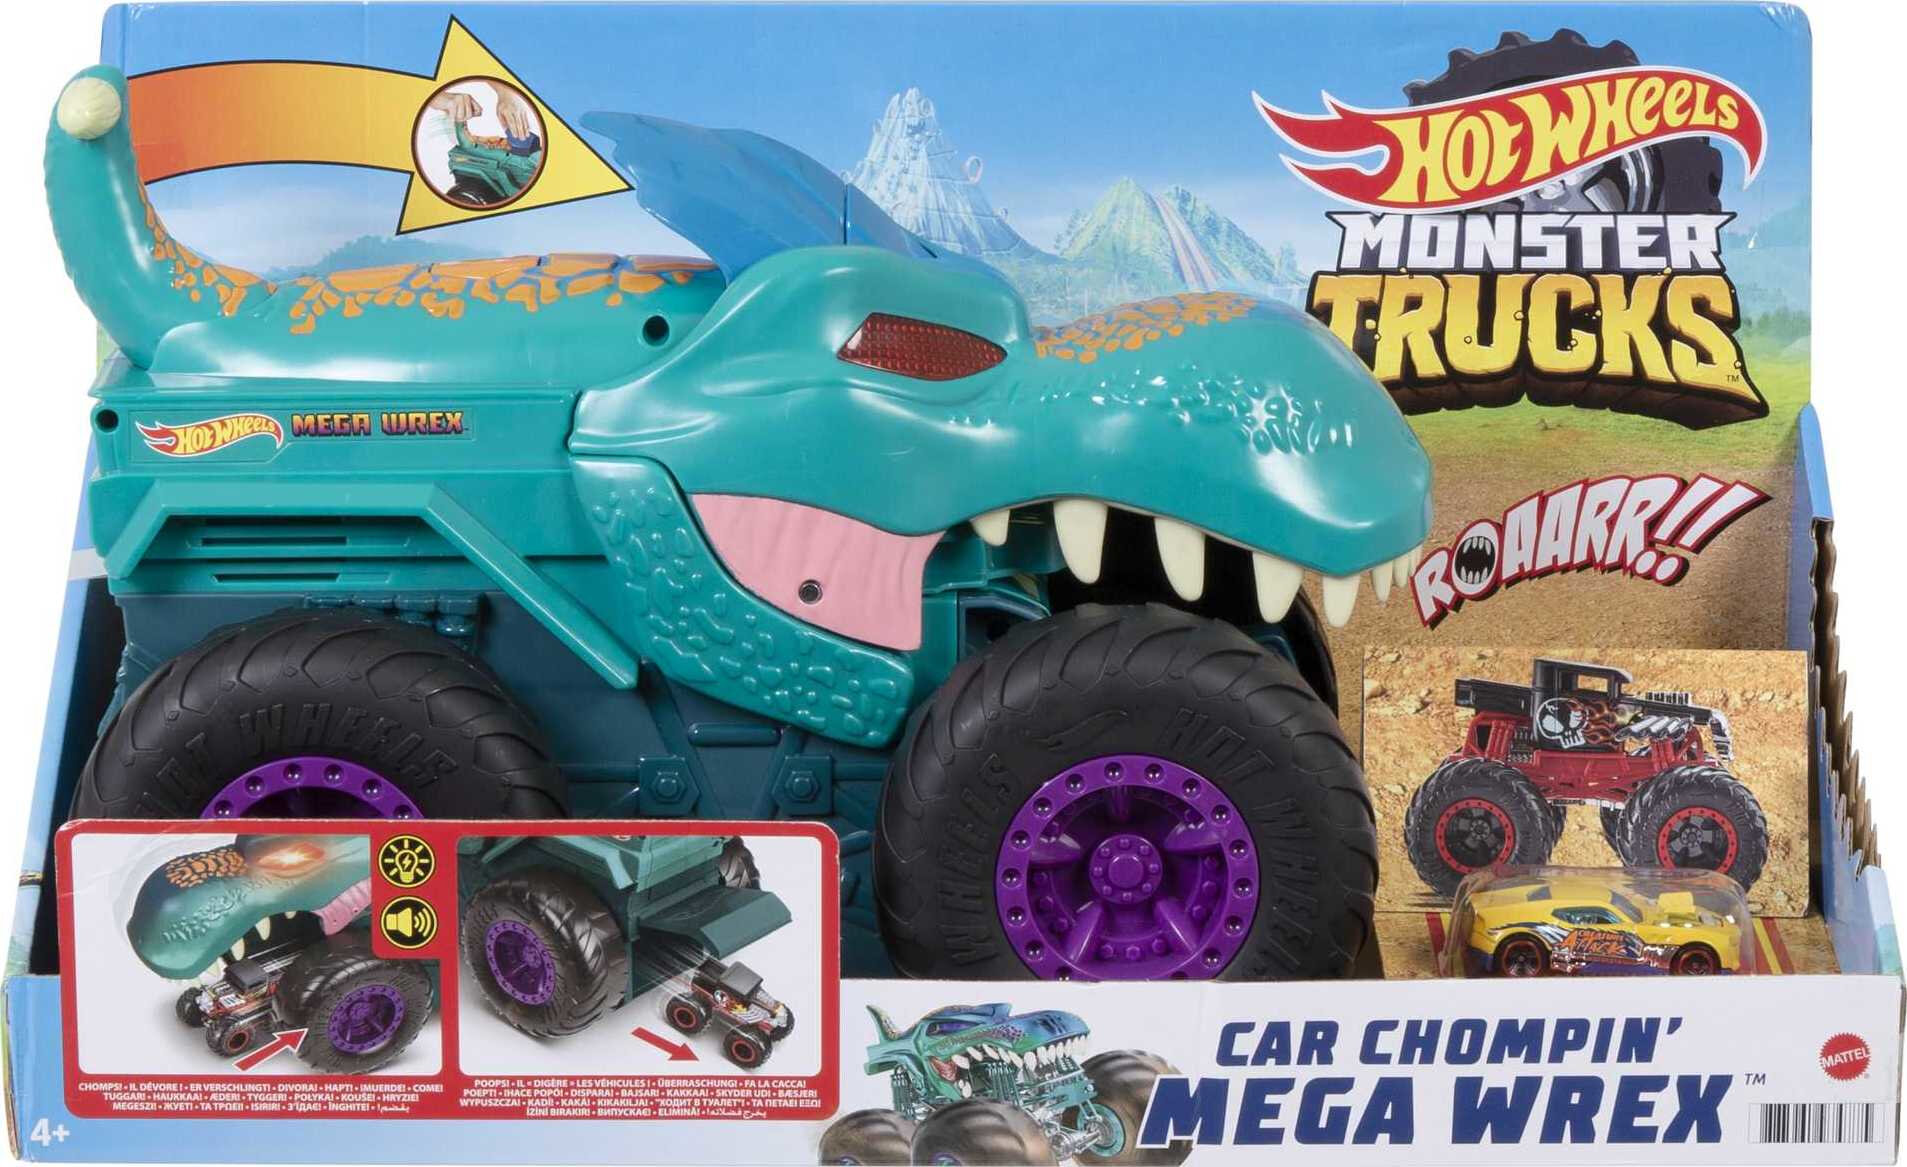 Hot Wheels Monster Trucks Car Chompin’ Mega Wrex Vehicle, for Ages 3 Years & Up - image 7 of 7